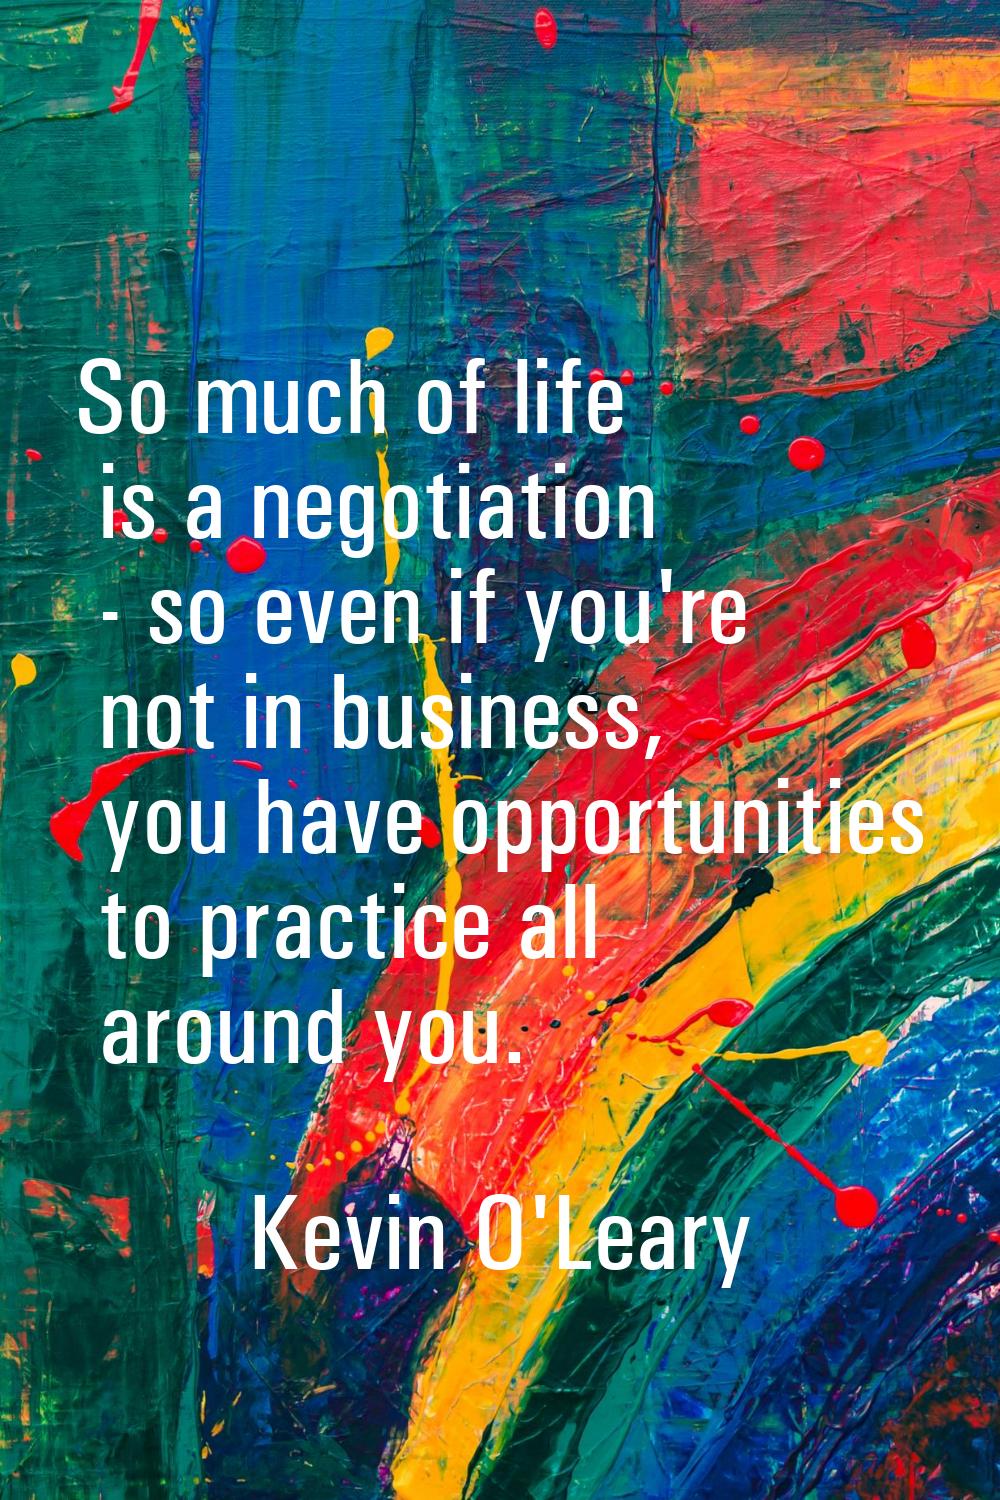 So much of life is a negotiation - so even if you're not in business, you have opportunities to pra